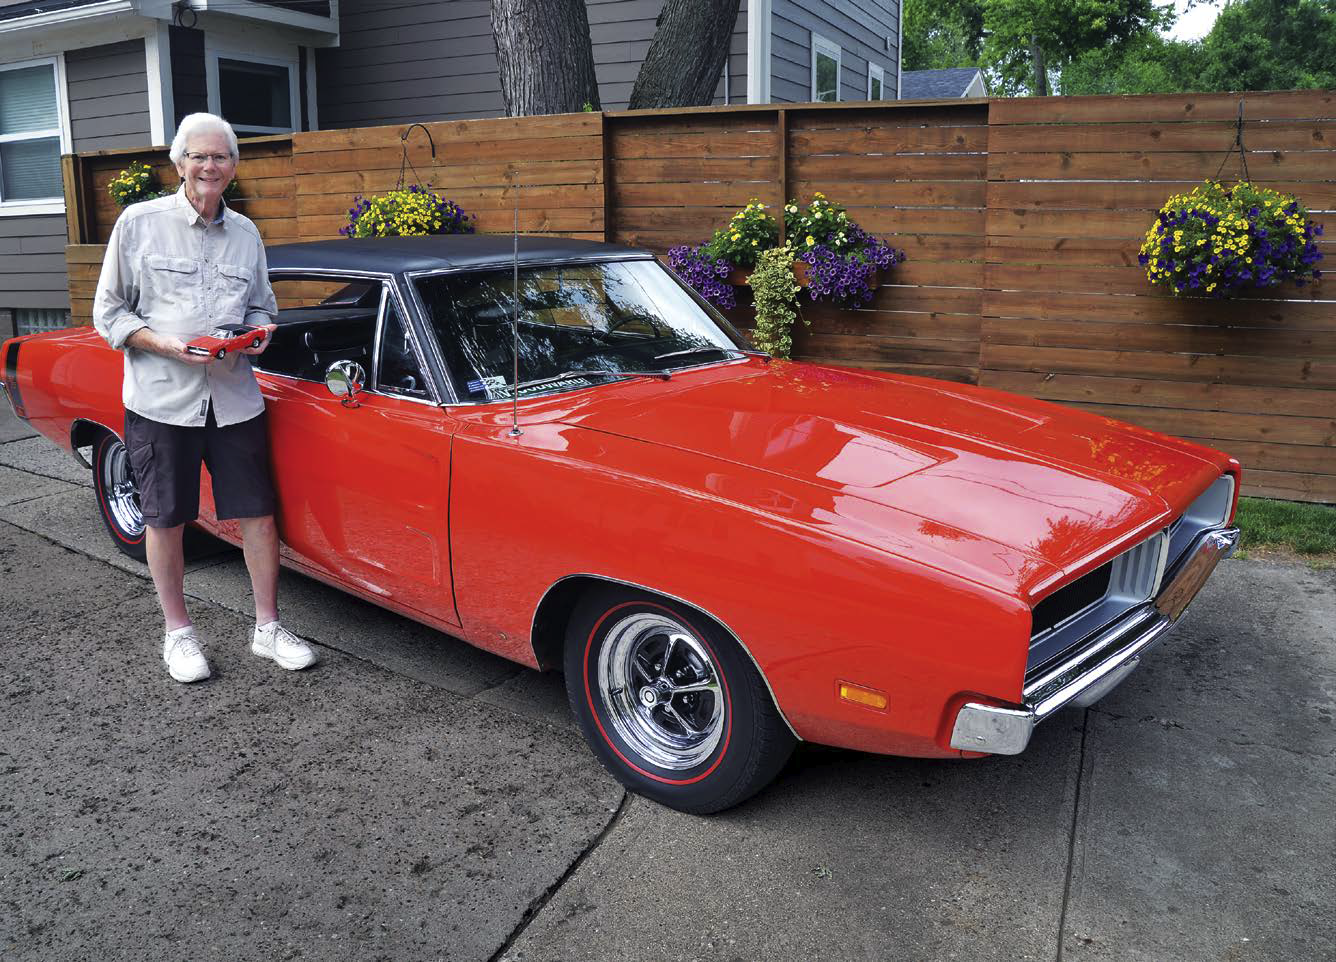 Marc Rozman with his 1969 Dodge Charger and a diecast model of the same